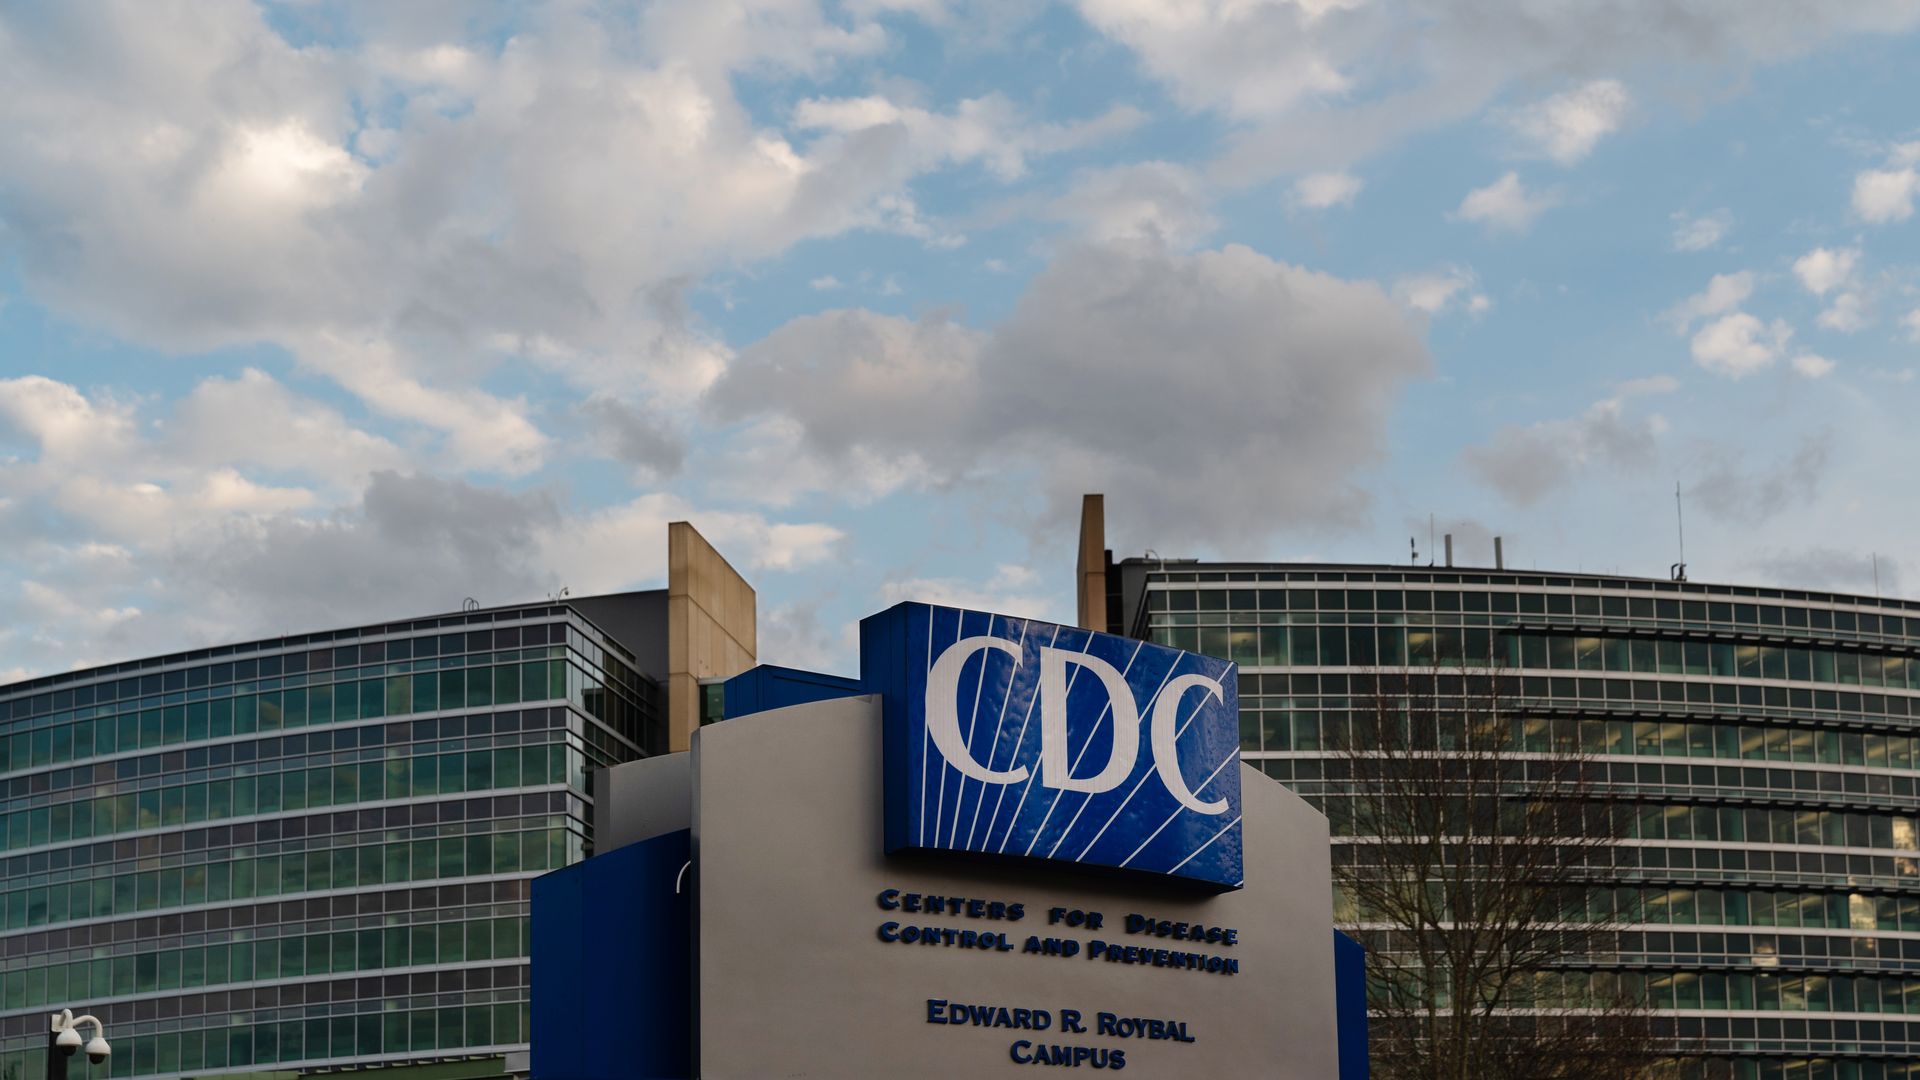 The Centers for Disease Control and Prevention (CDC) headquarters stands in Atlanta, Georgia, U.S, on Saturday, March 14, 2020.